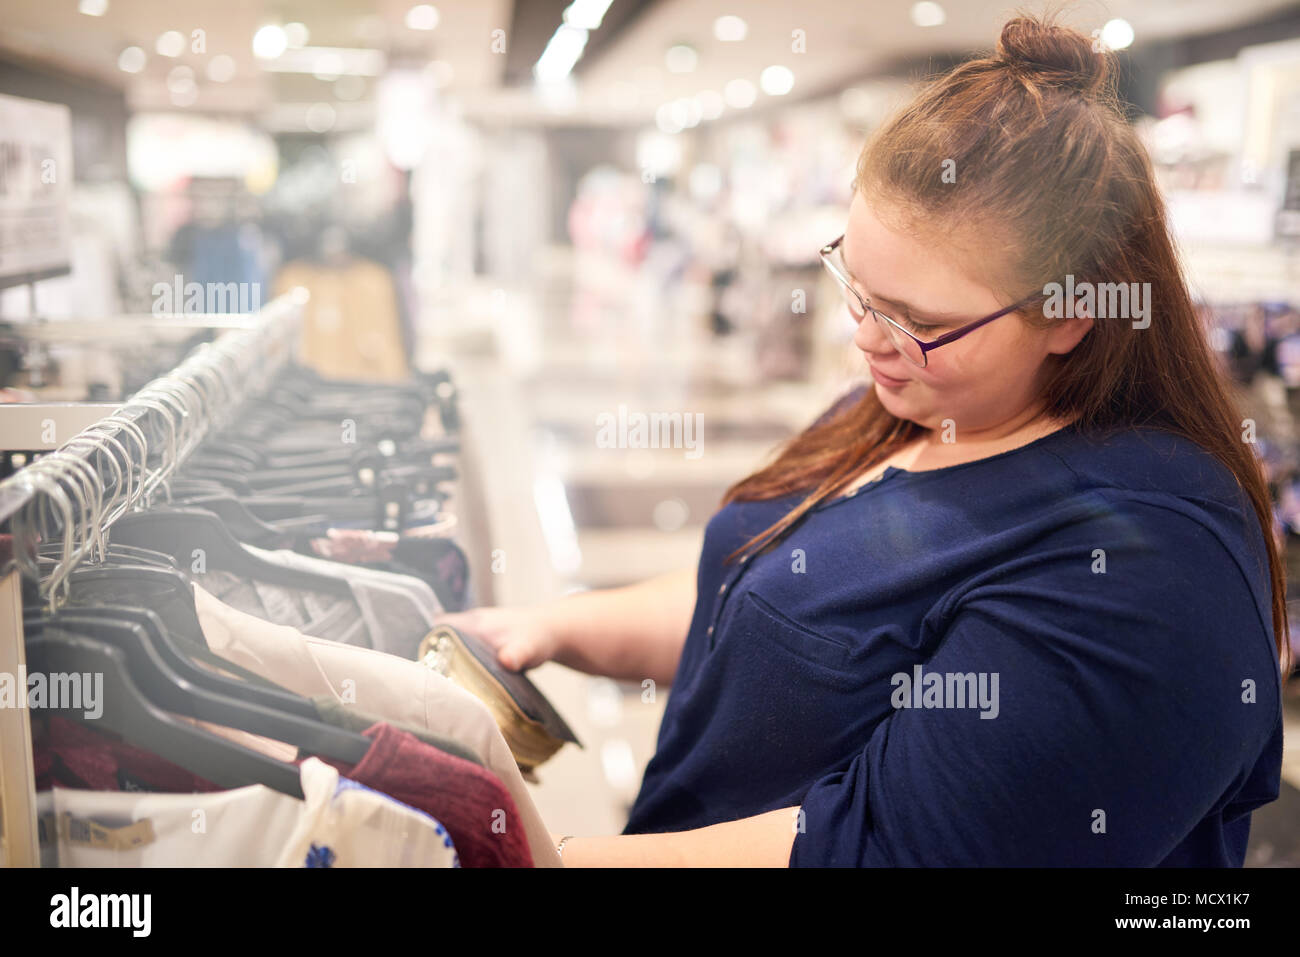 Bigger white girl busy looking for the perfect outfit while shopping in a mall by herself for a formal work function she has to attend in formal attire. Stock Photo